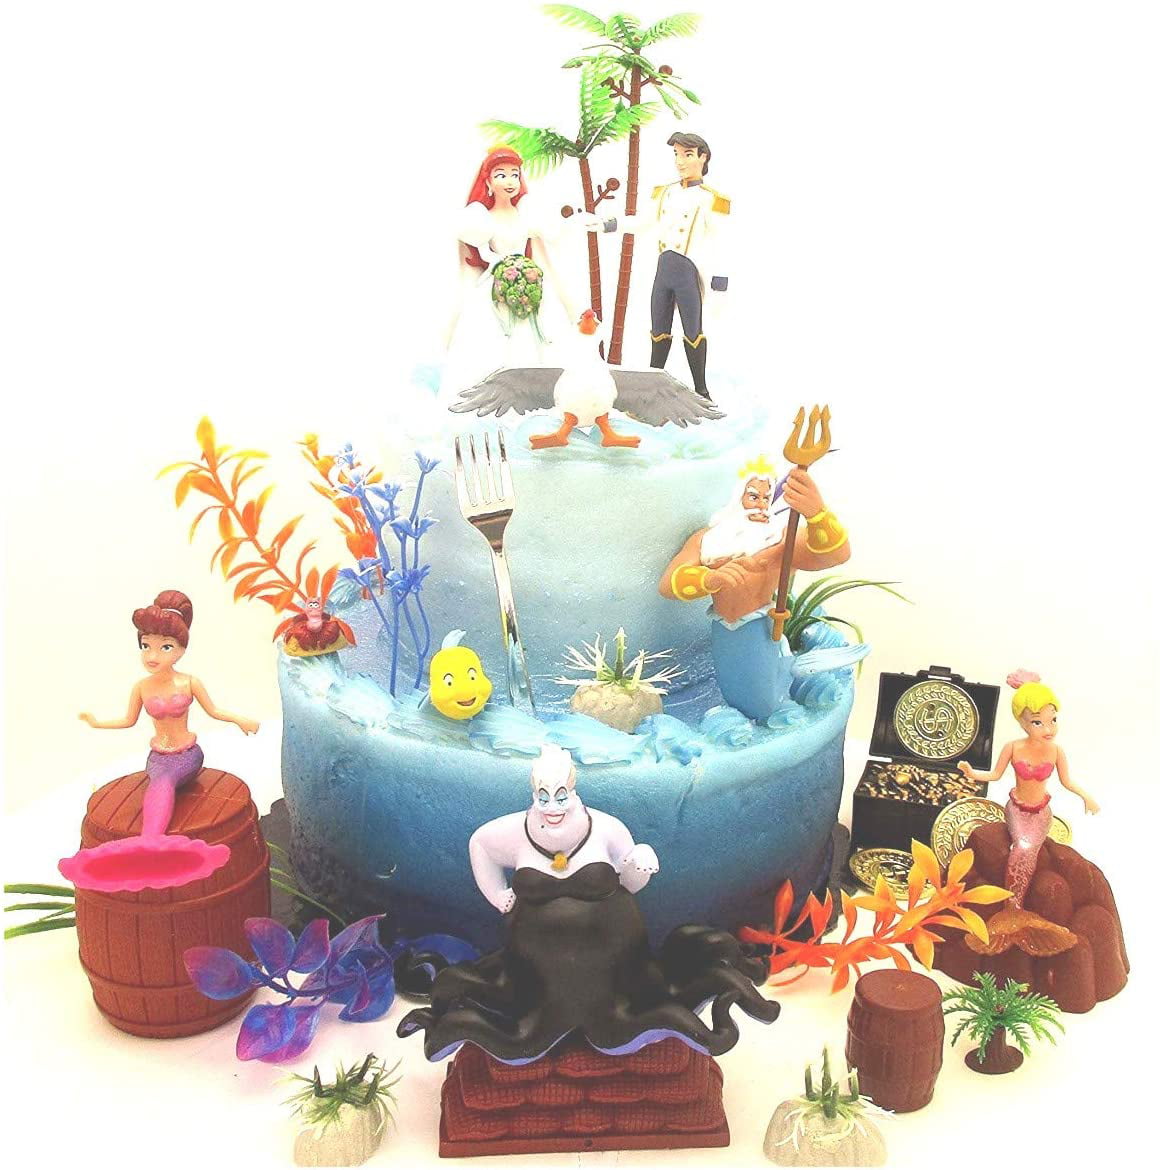 Cake Toppers Under The Sea Little Mermaid Birthday Set Featuring Ariel And Friends Figures With Decorative Themed Accessories Walmart Com Walmart Com